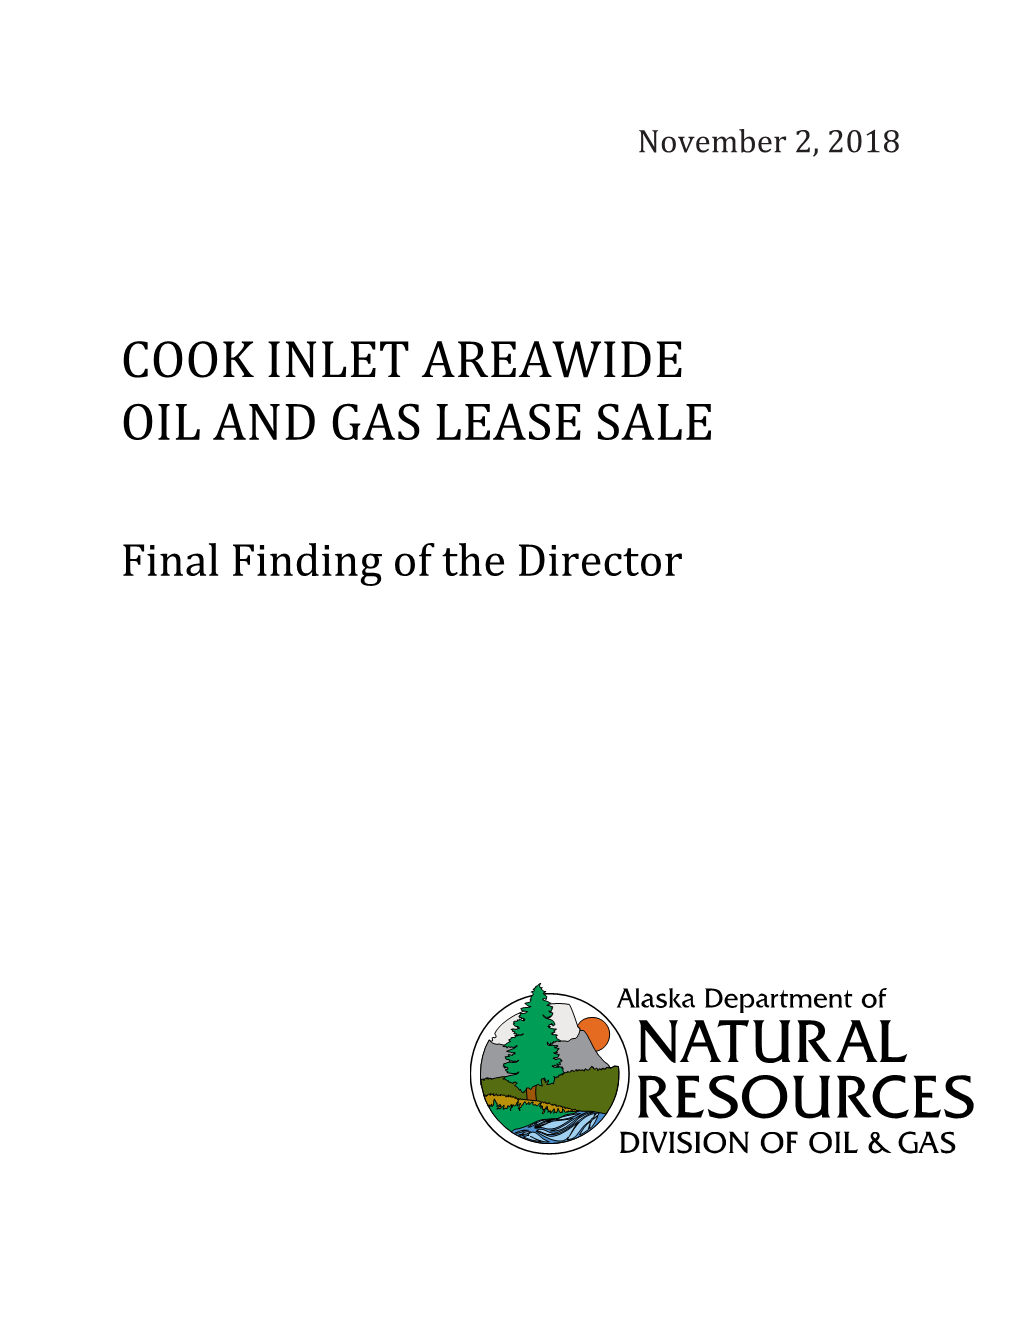 Cook Inlet Areawide Oil and Gas Lease Sale